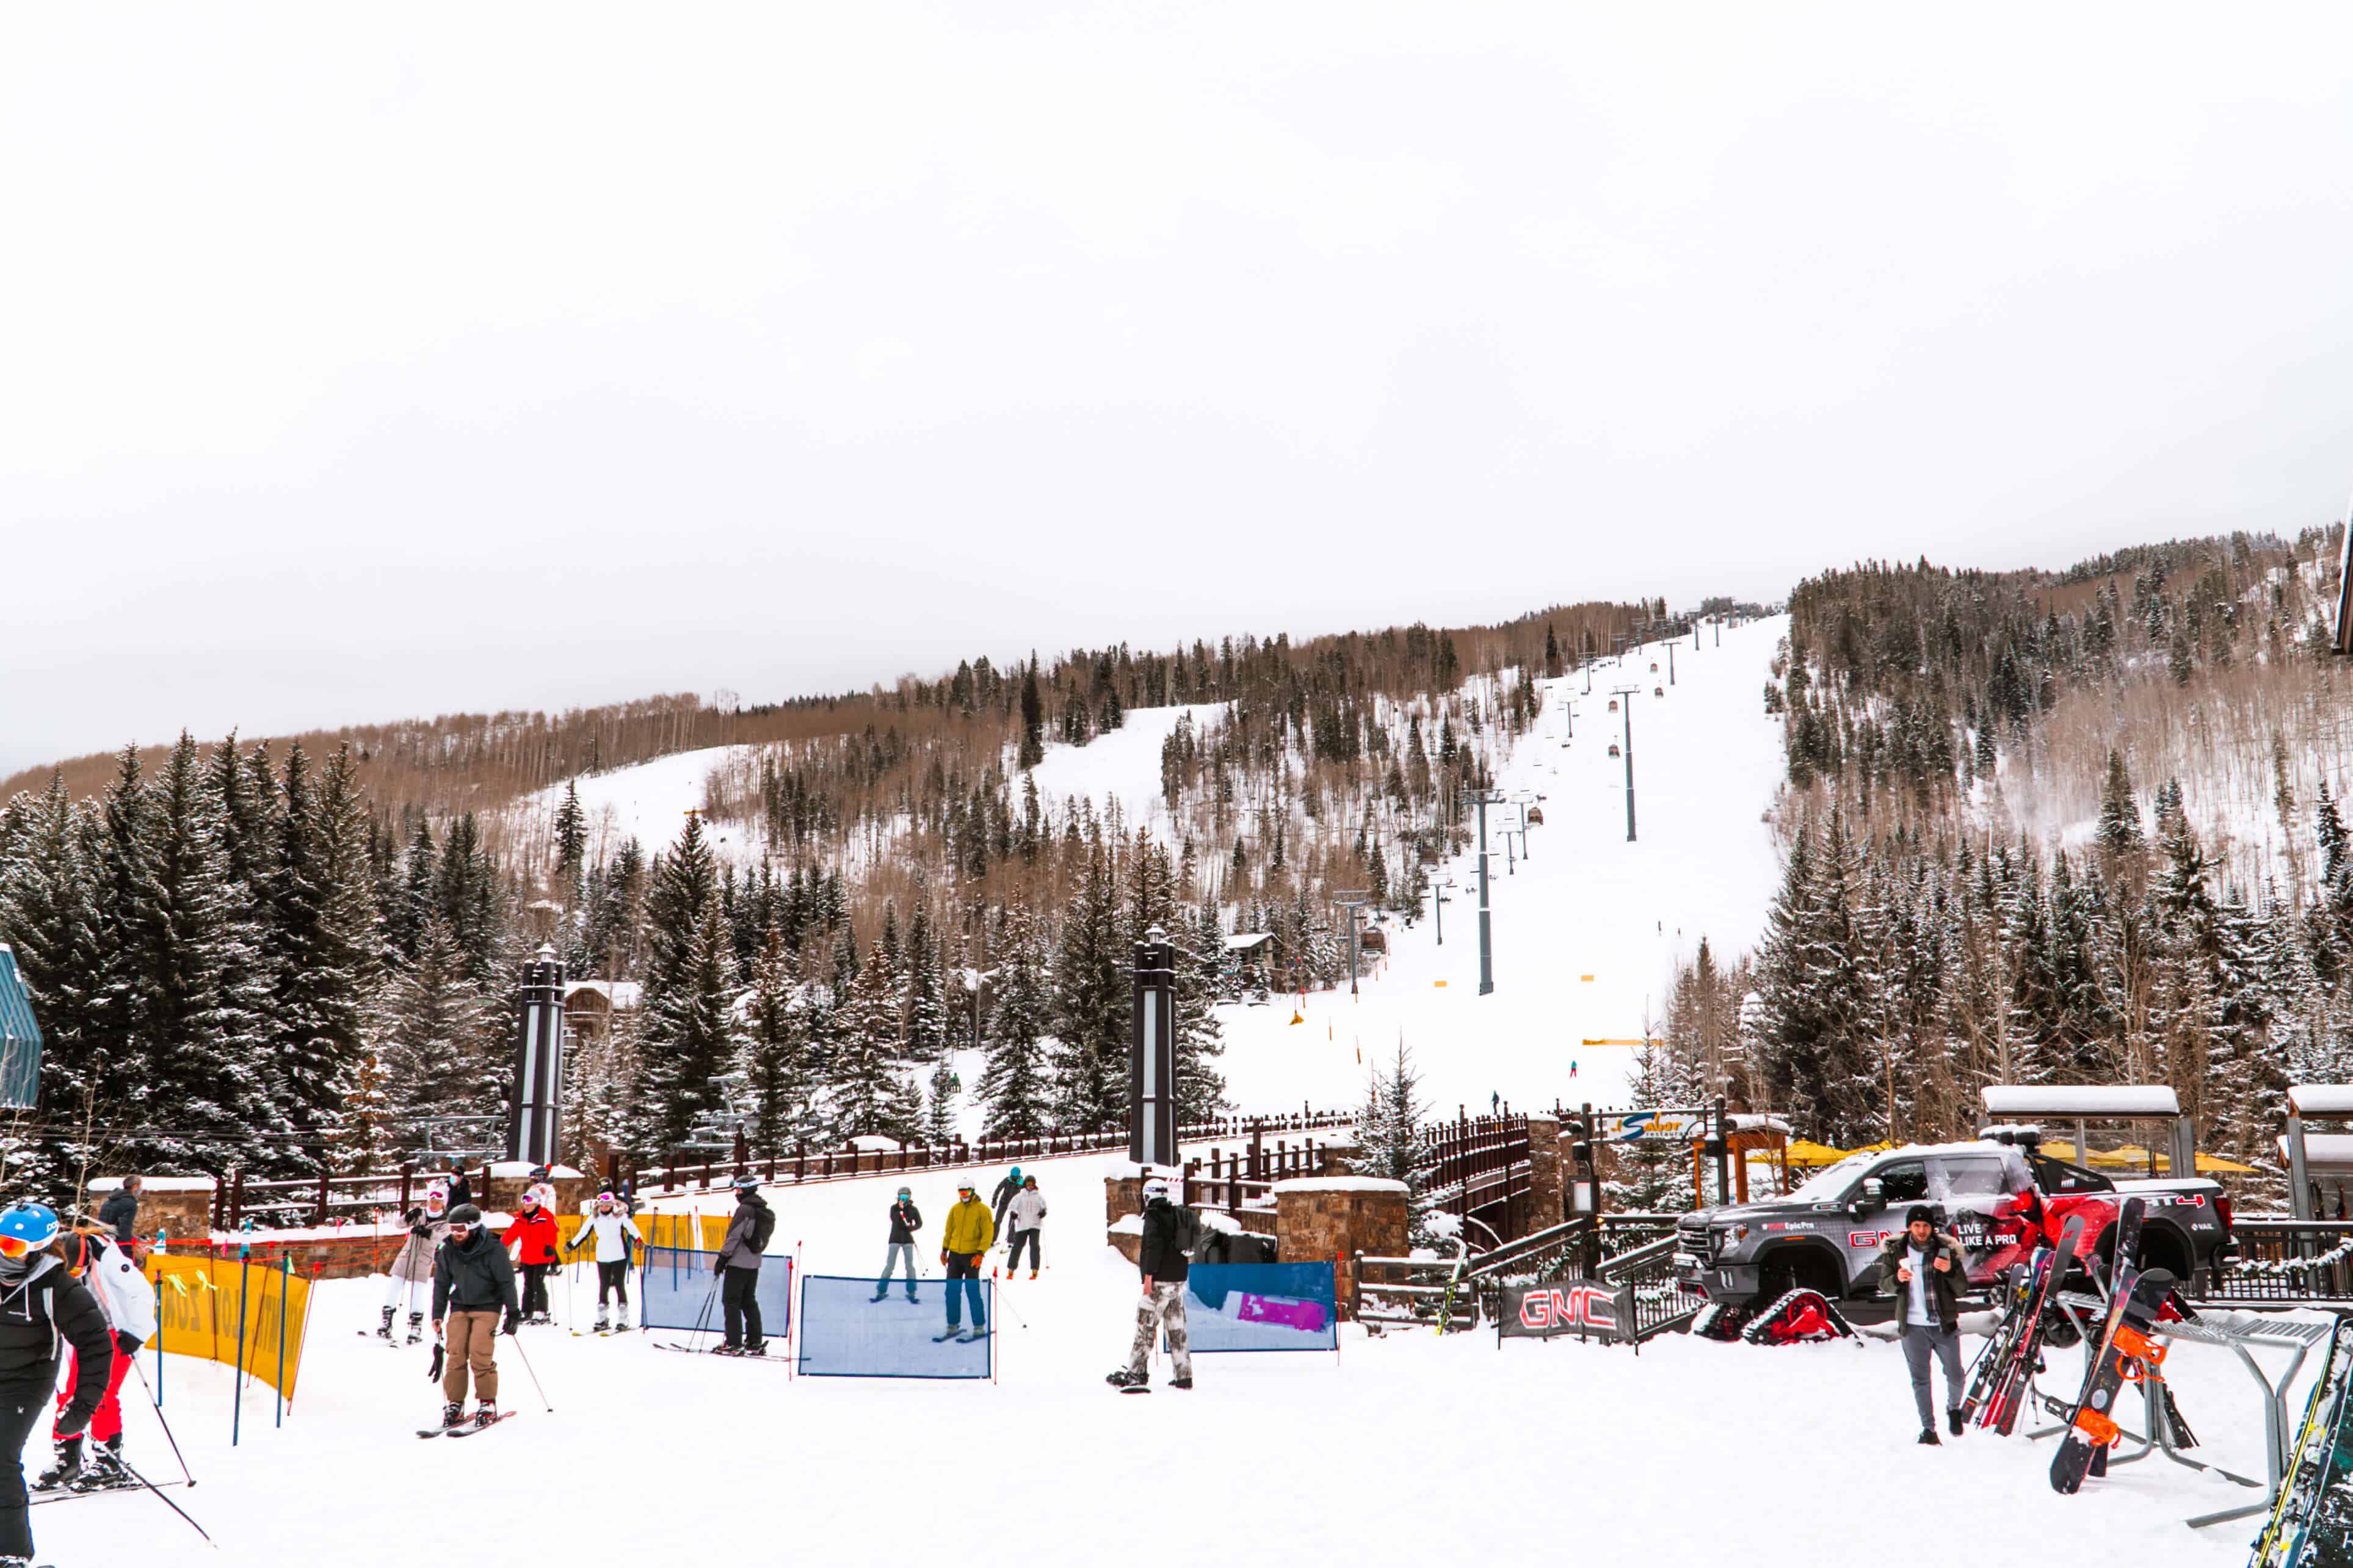 Vail mountain | The Ultimate Guide to Vail, Colorado